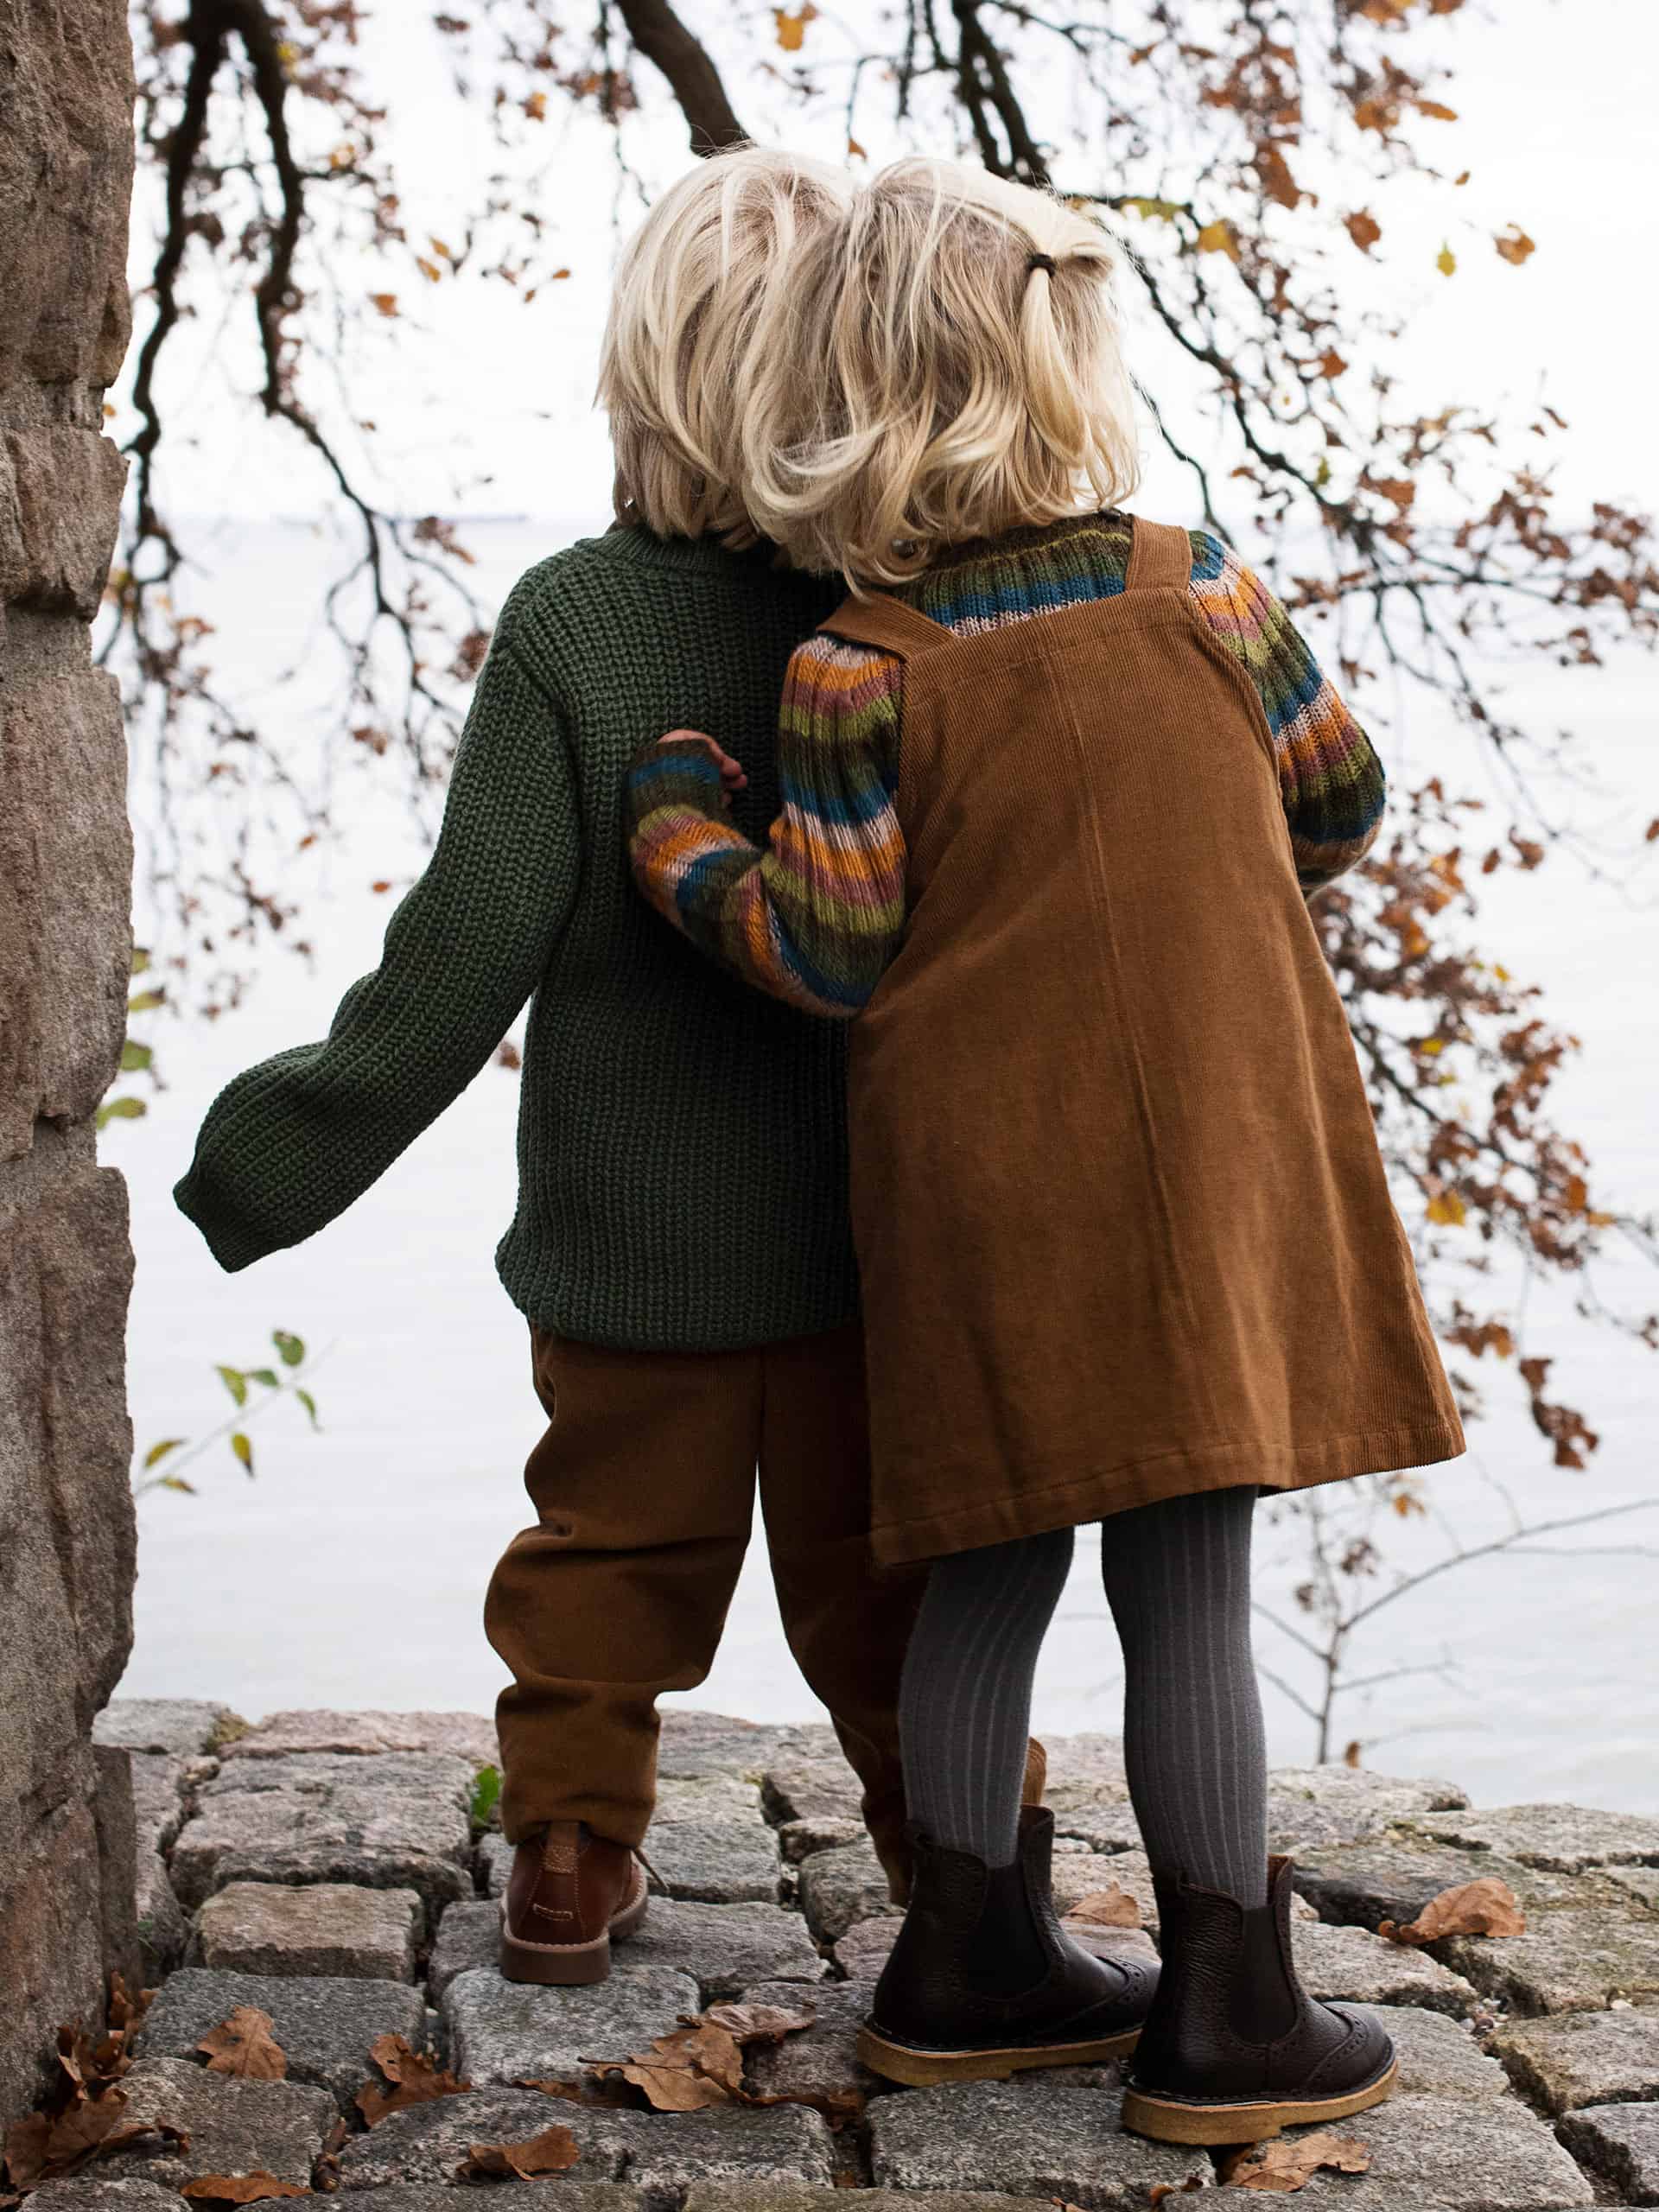 Comfort First: Choosing Practical and Cozy Outfits for Children